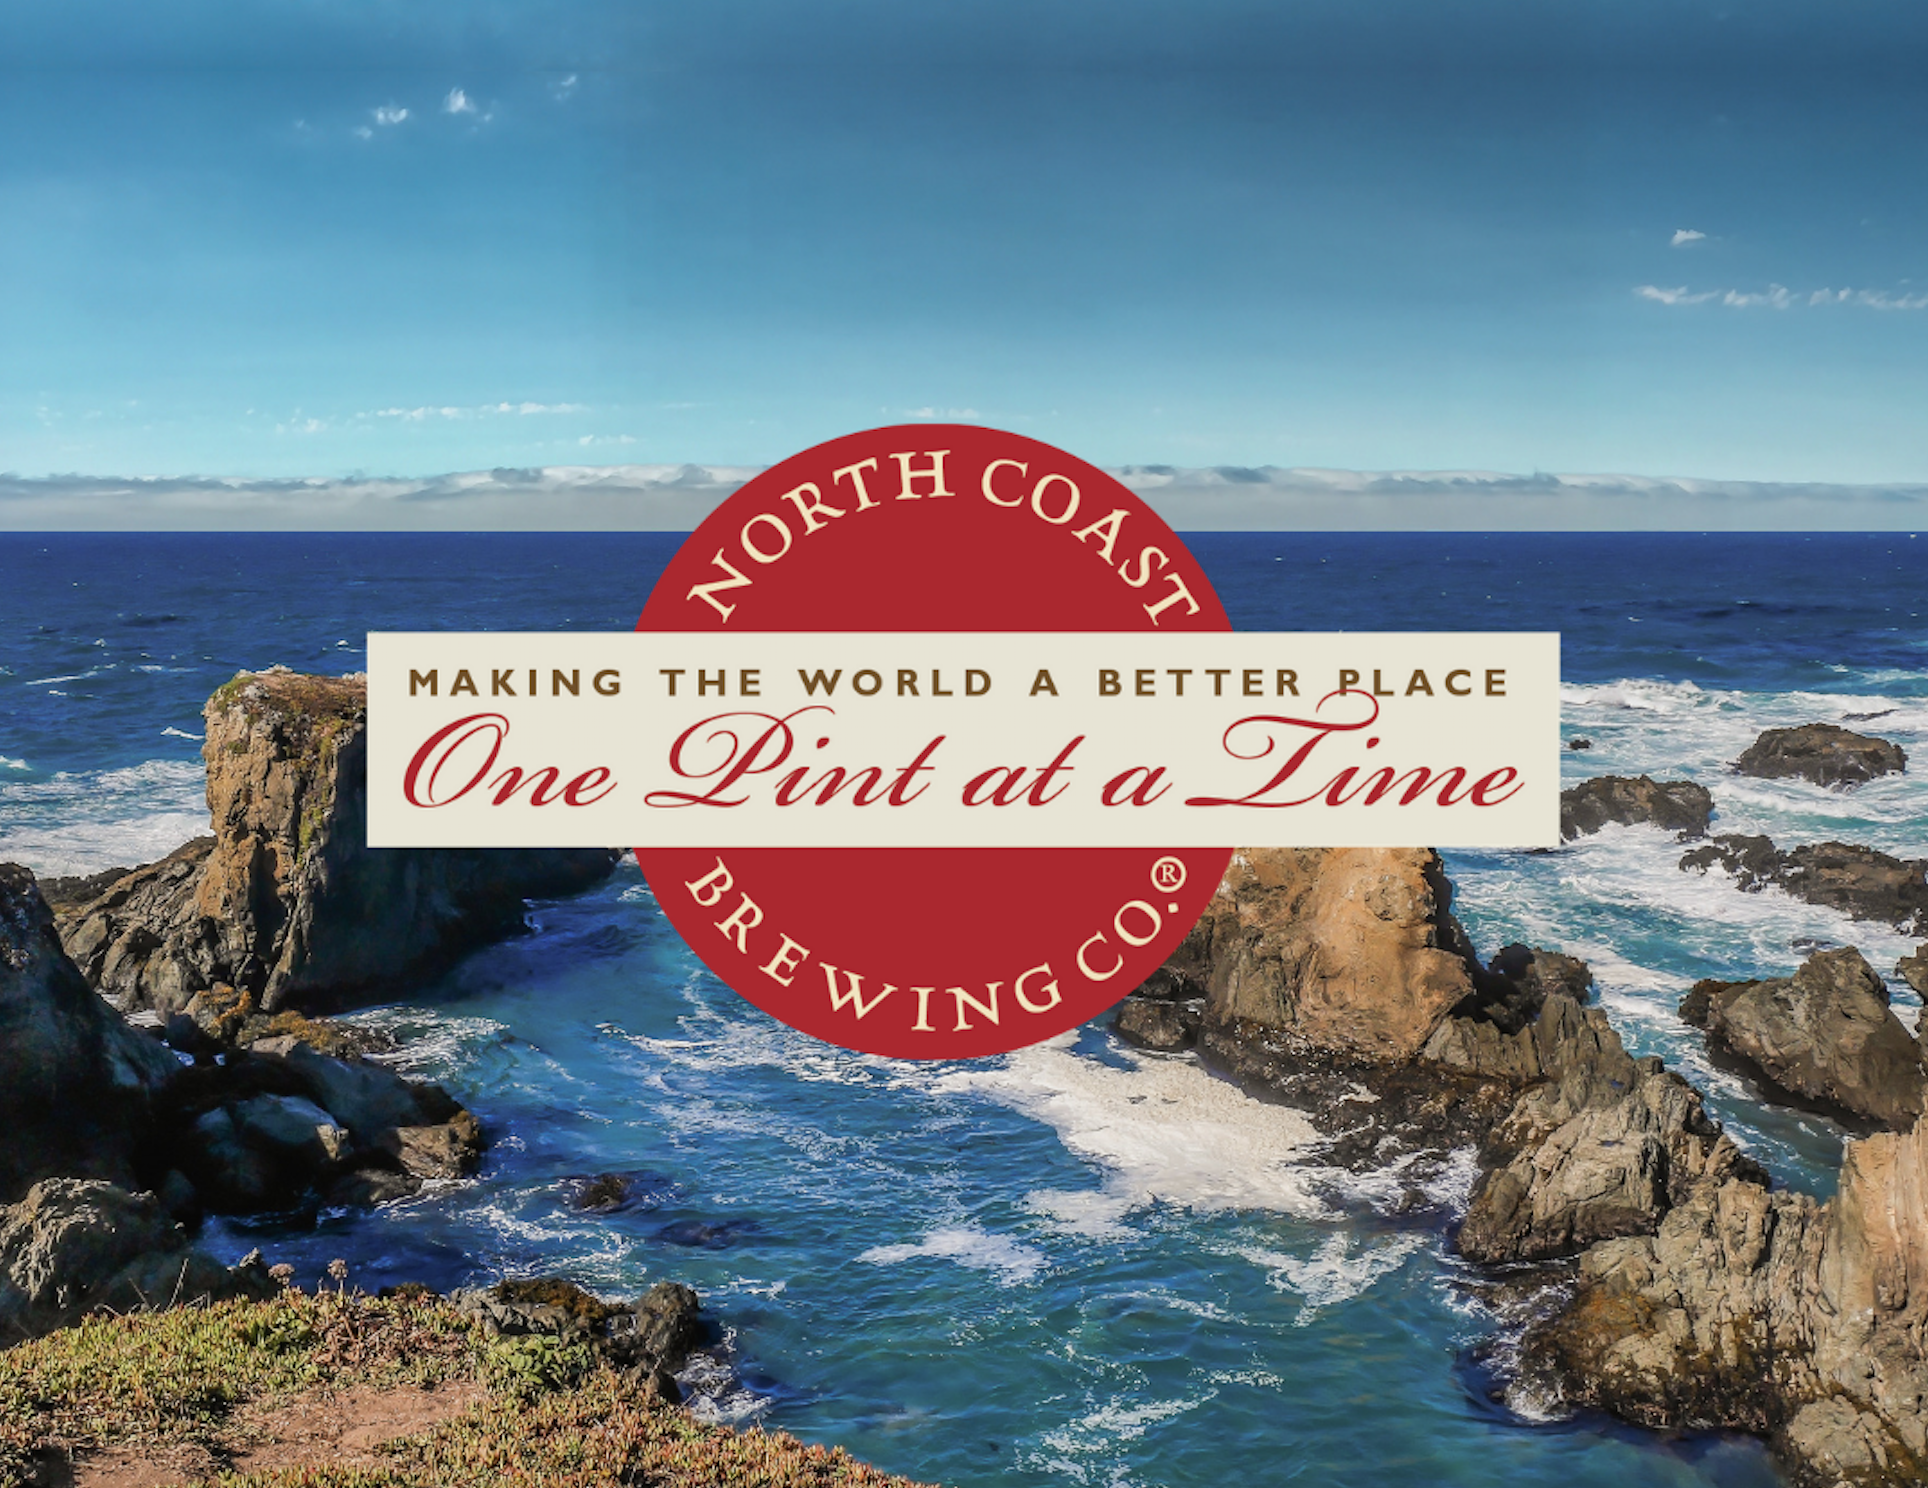 North Coast Brewing Company Introduces the One Pint at a Time Initiative